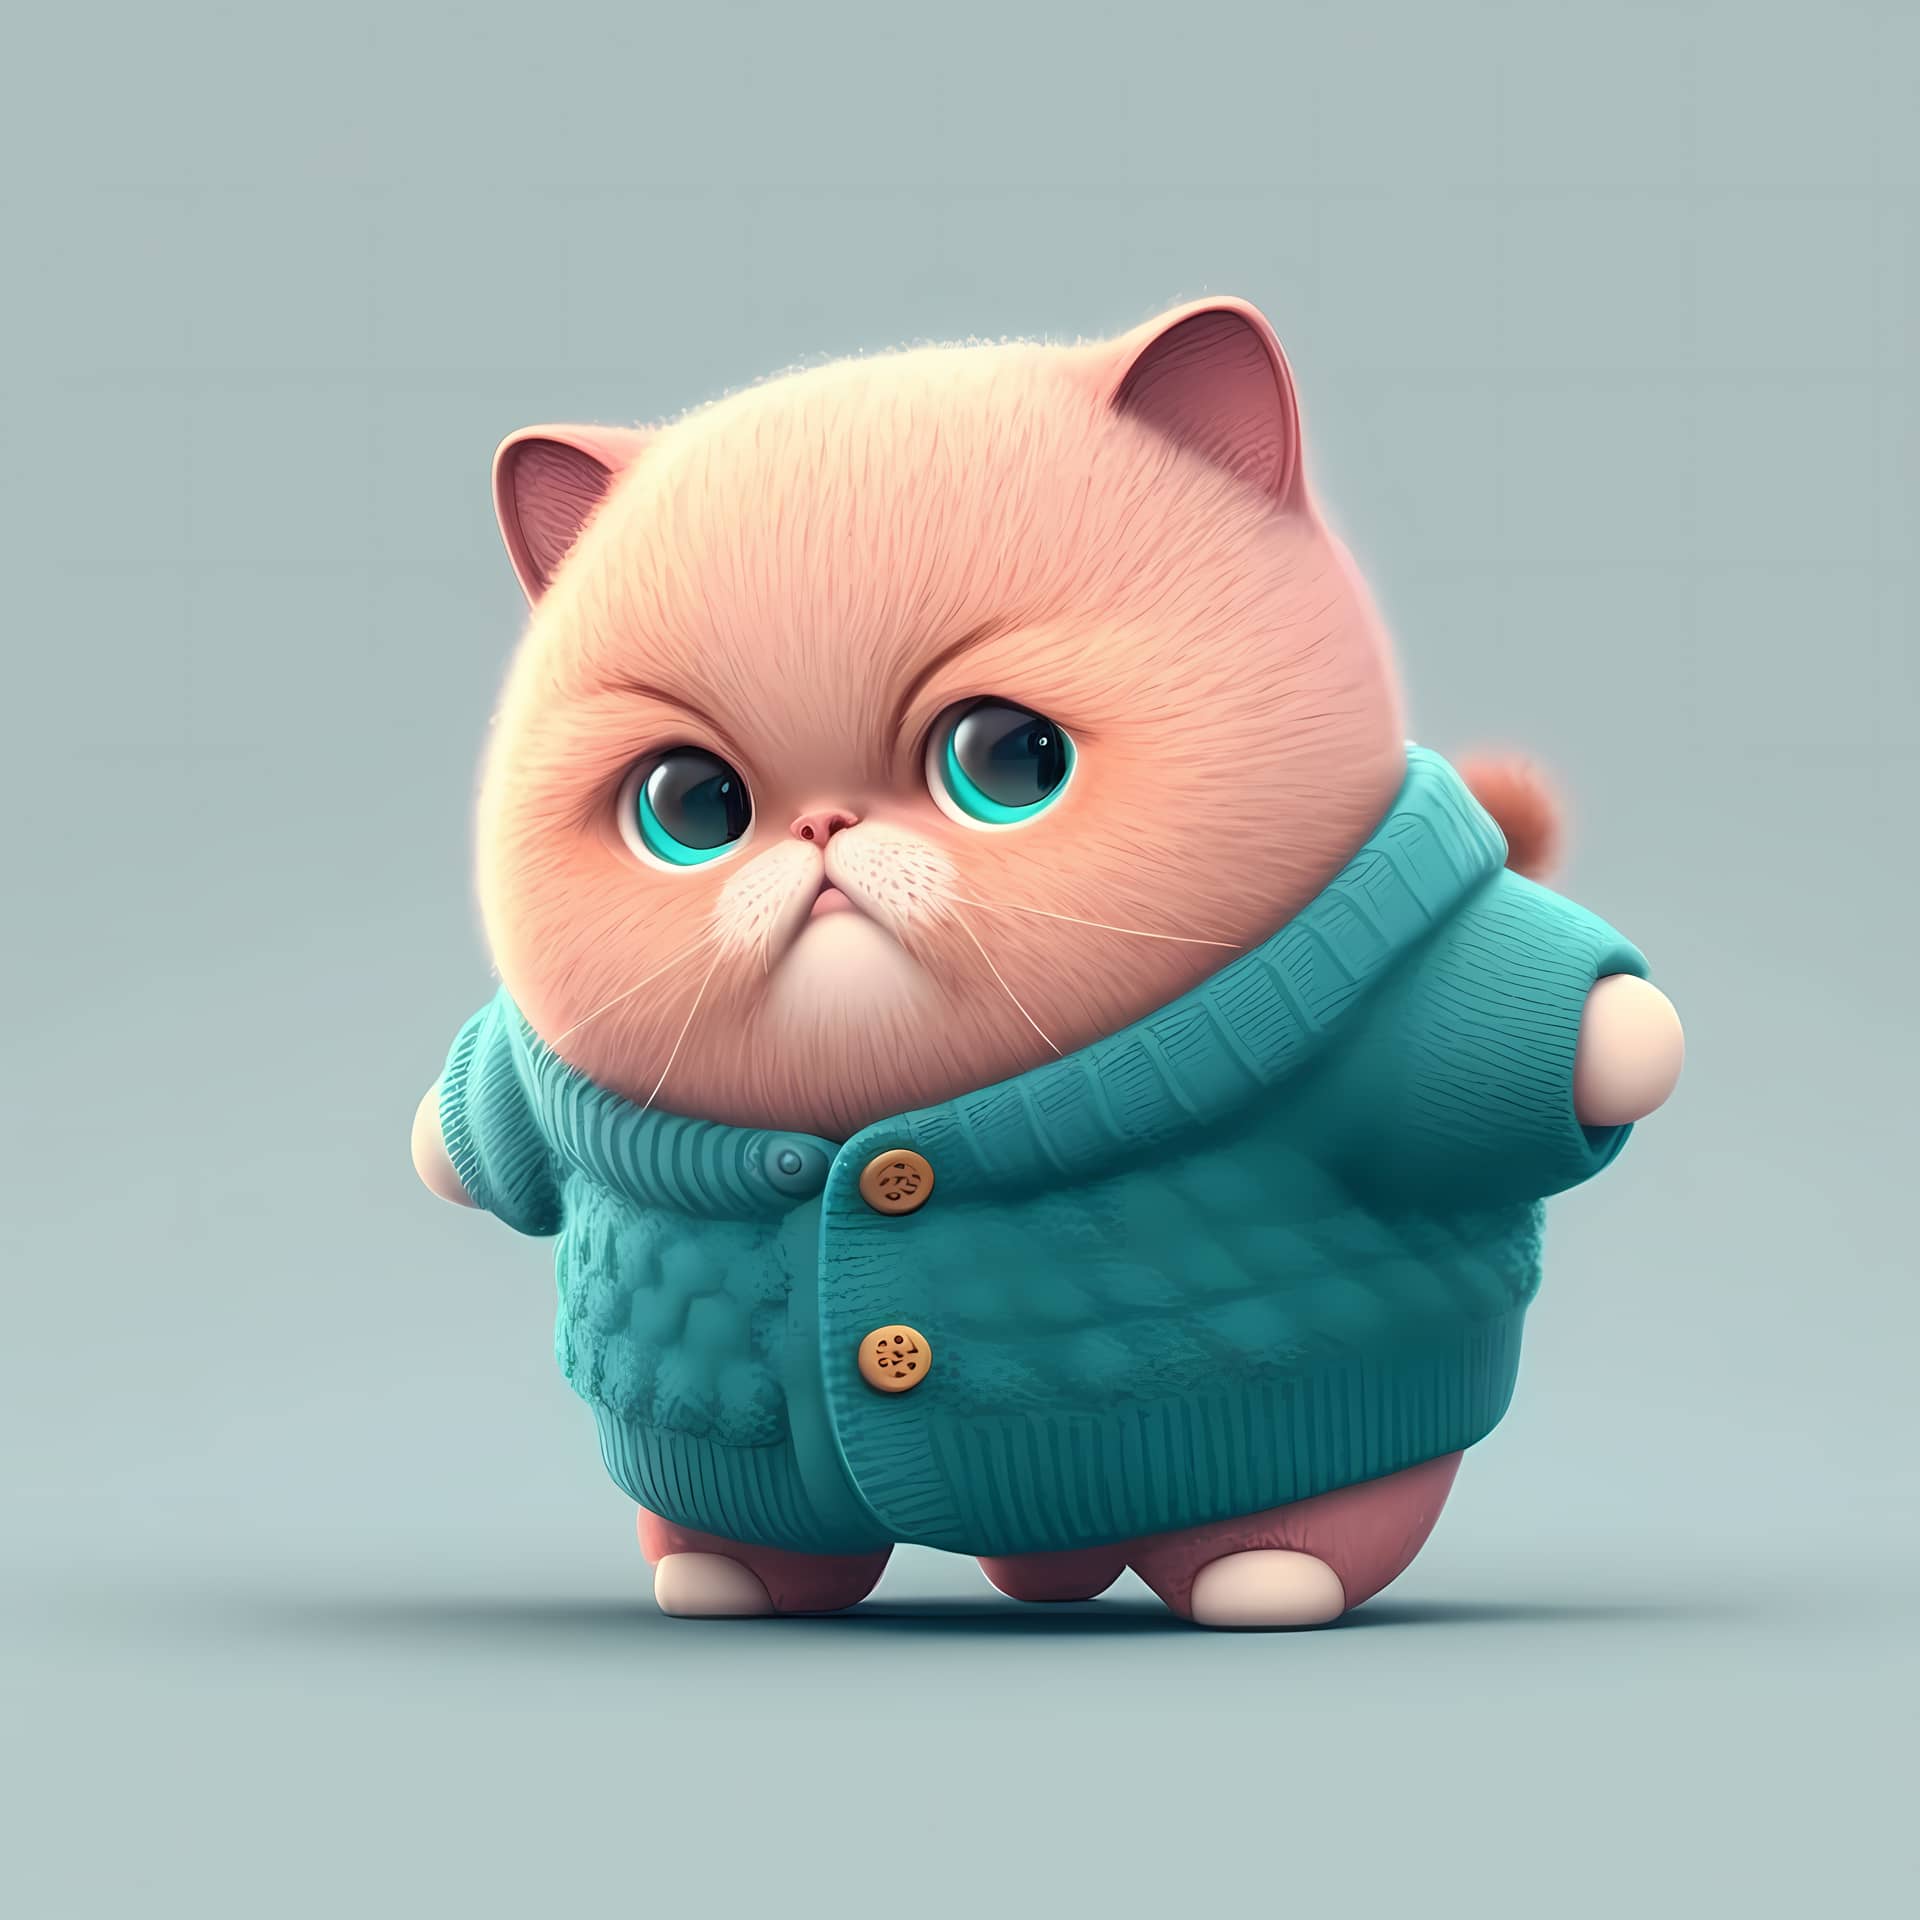 Cute profile photos cat characters wear cute funny colorful clothes excellent picture